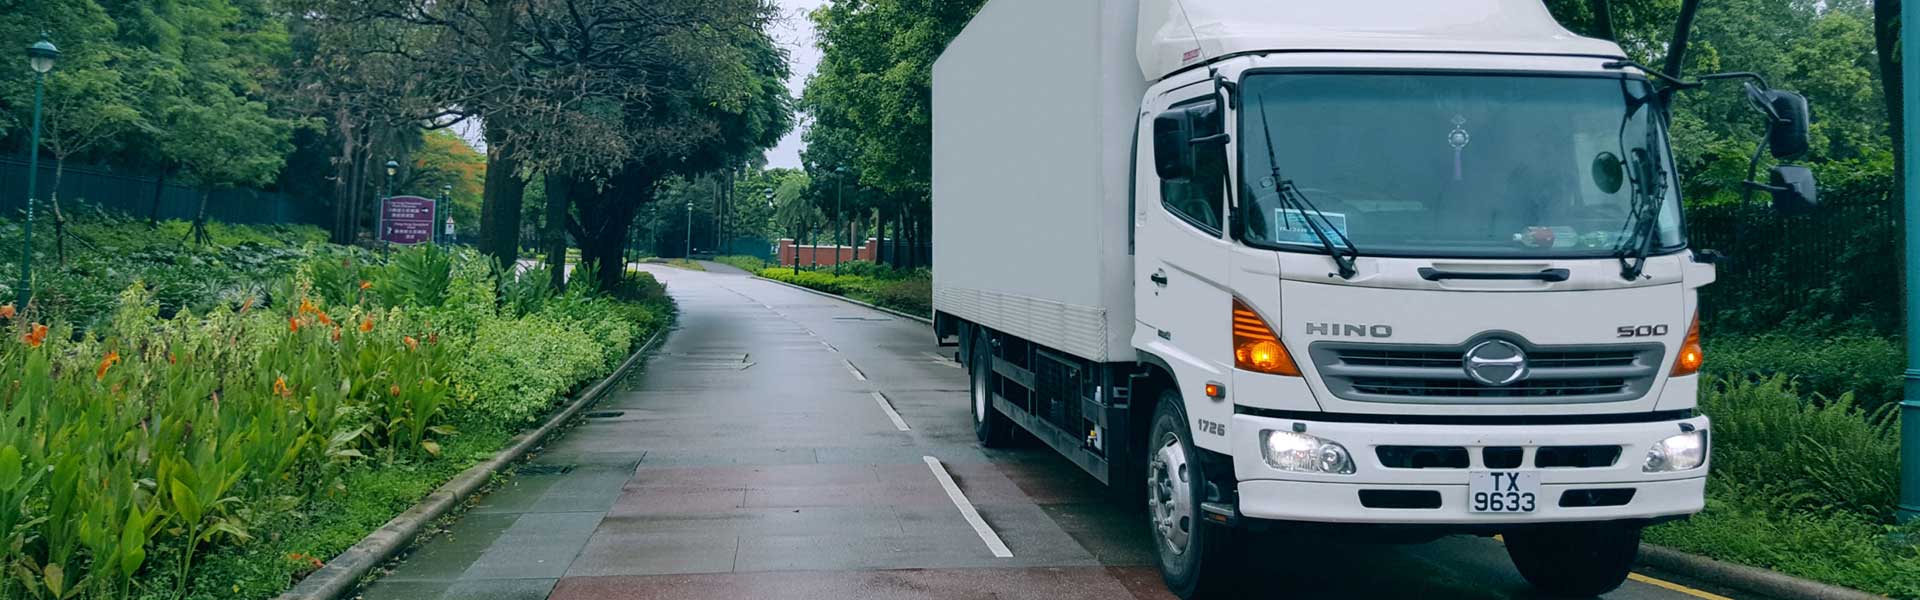 Transportation Services - handling inbound and outbound daytime and territory-wide delivery of bulk cargo, terminal pick-up, airport pick-up, refrigerated freight, valuables, records, dangerous chemicals, heavy goods, exhibition move-in and move-out, site deliveries